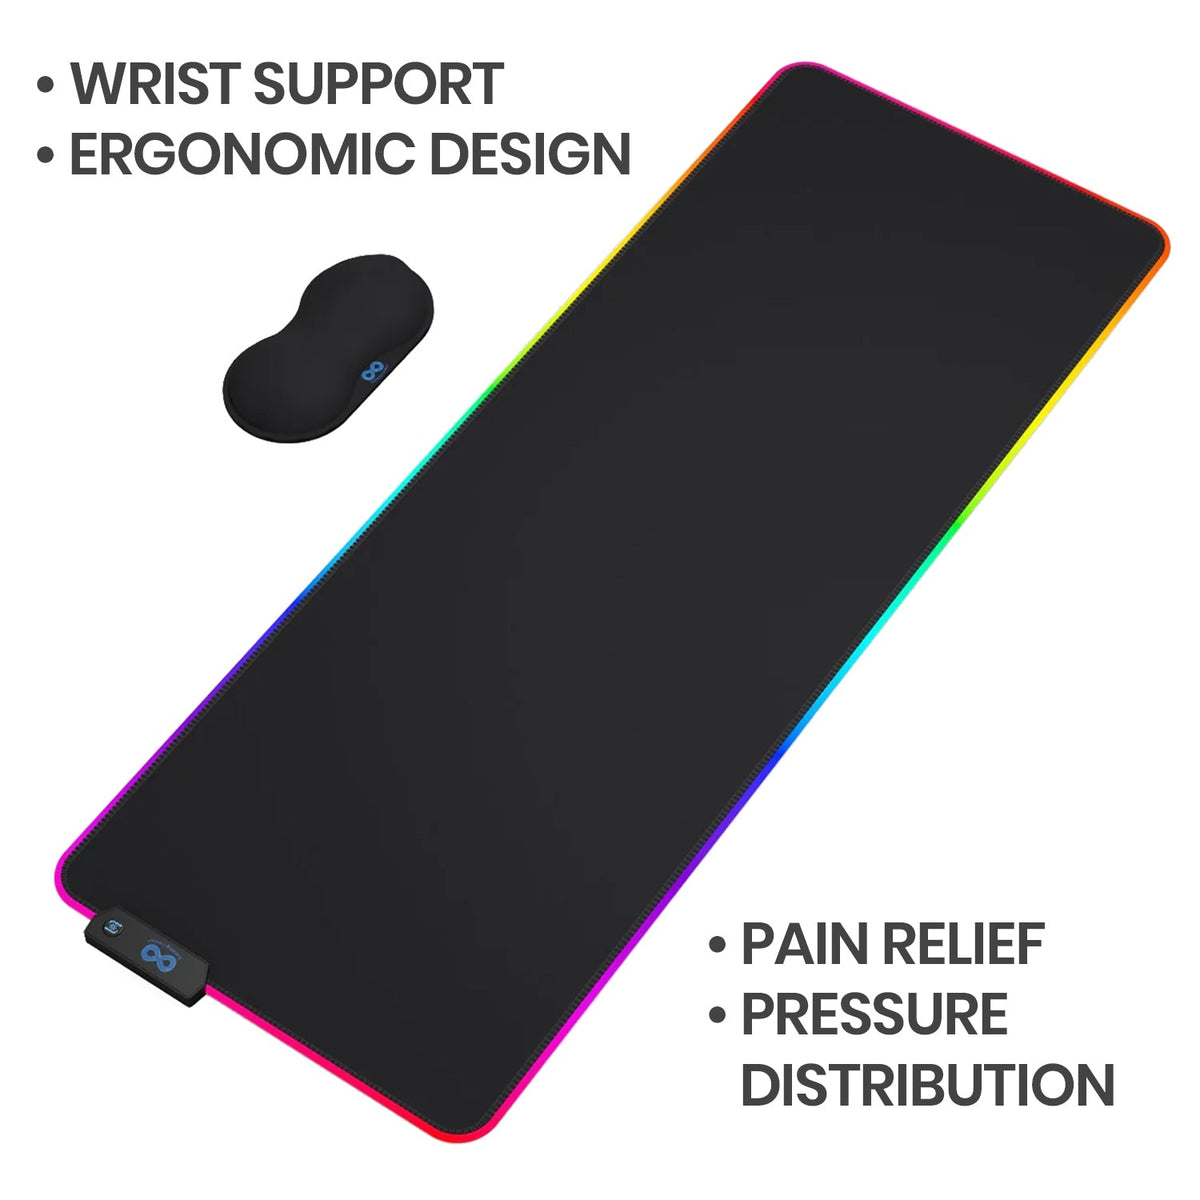 Mouse Pads And Wrists Rests - Why They Matter